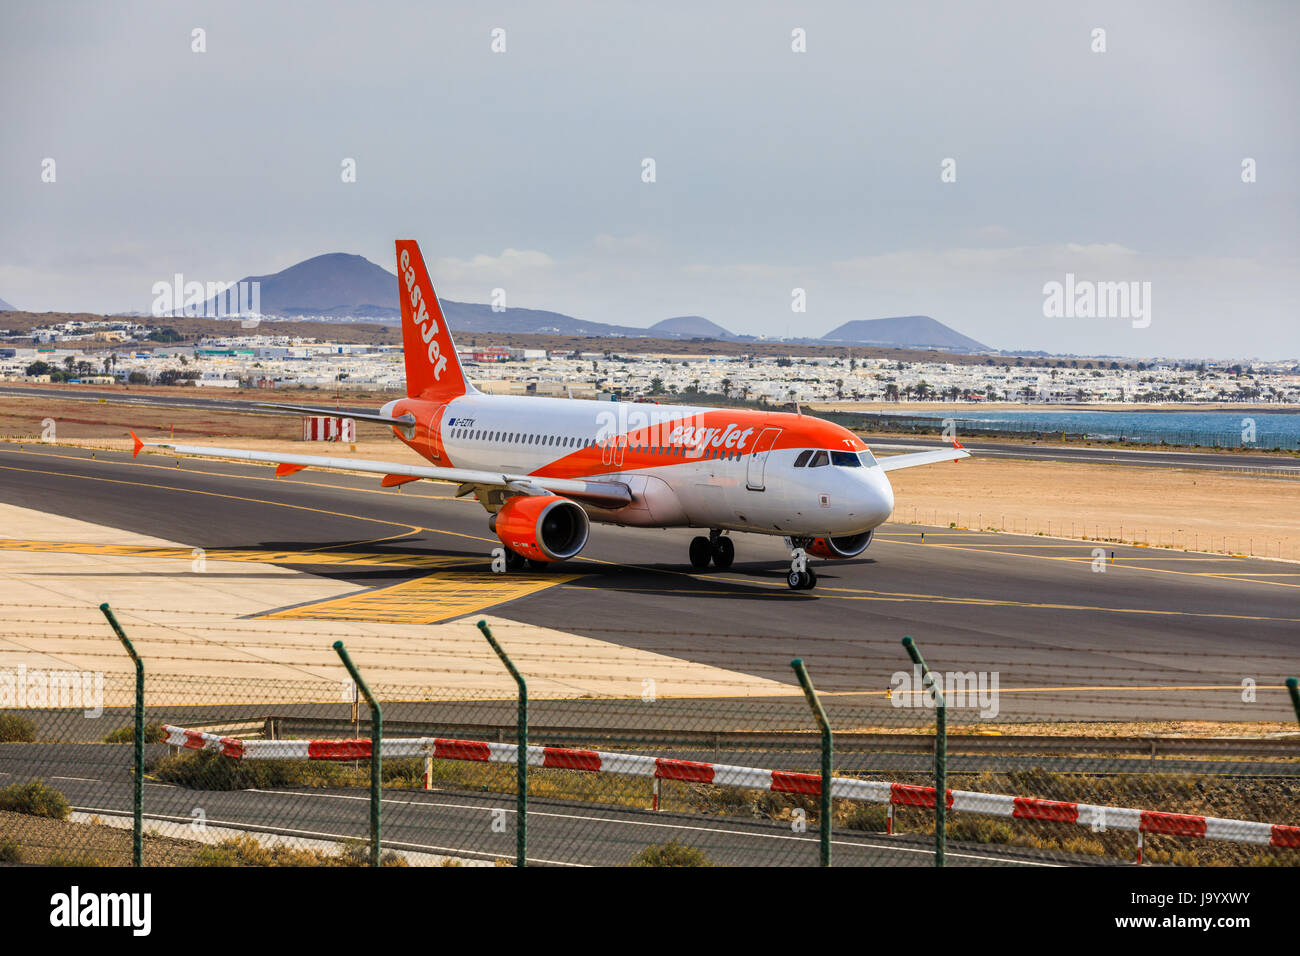 ARECIFE, SPAIN - APRIL, 15 2017: AirBus A320 - 200 of easyjet ready to take off at Lanzarote Airport Stock Photo